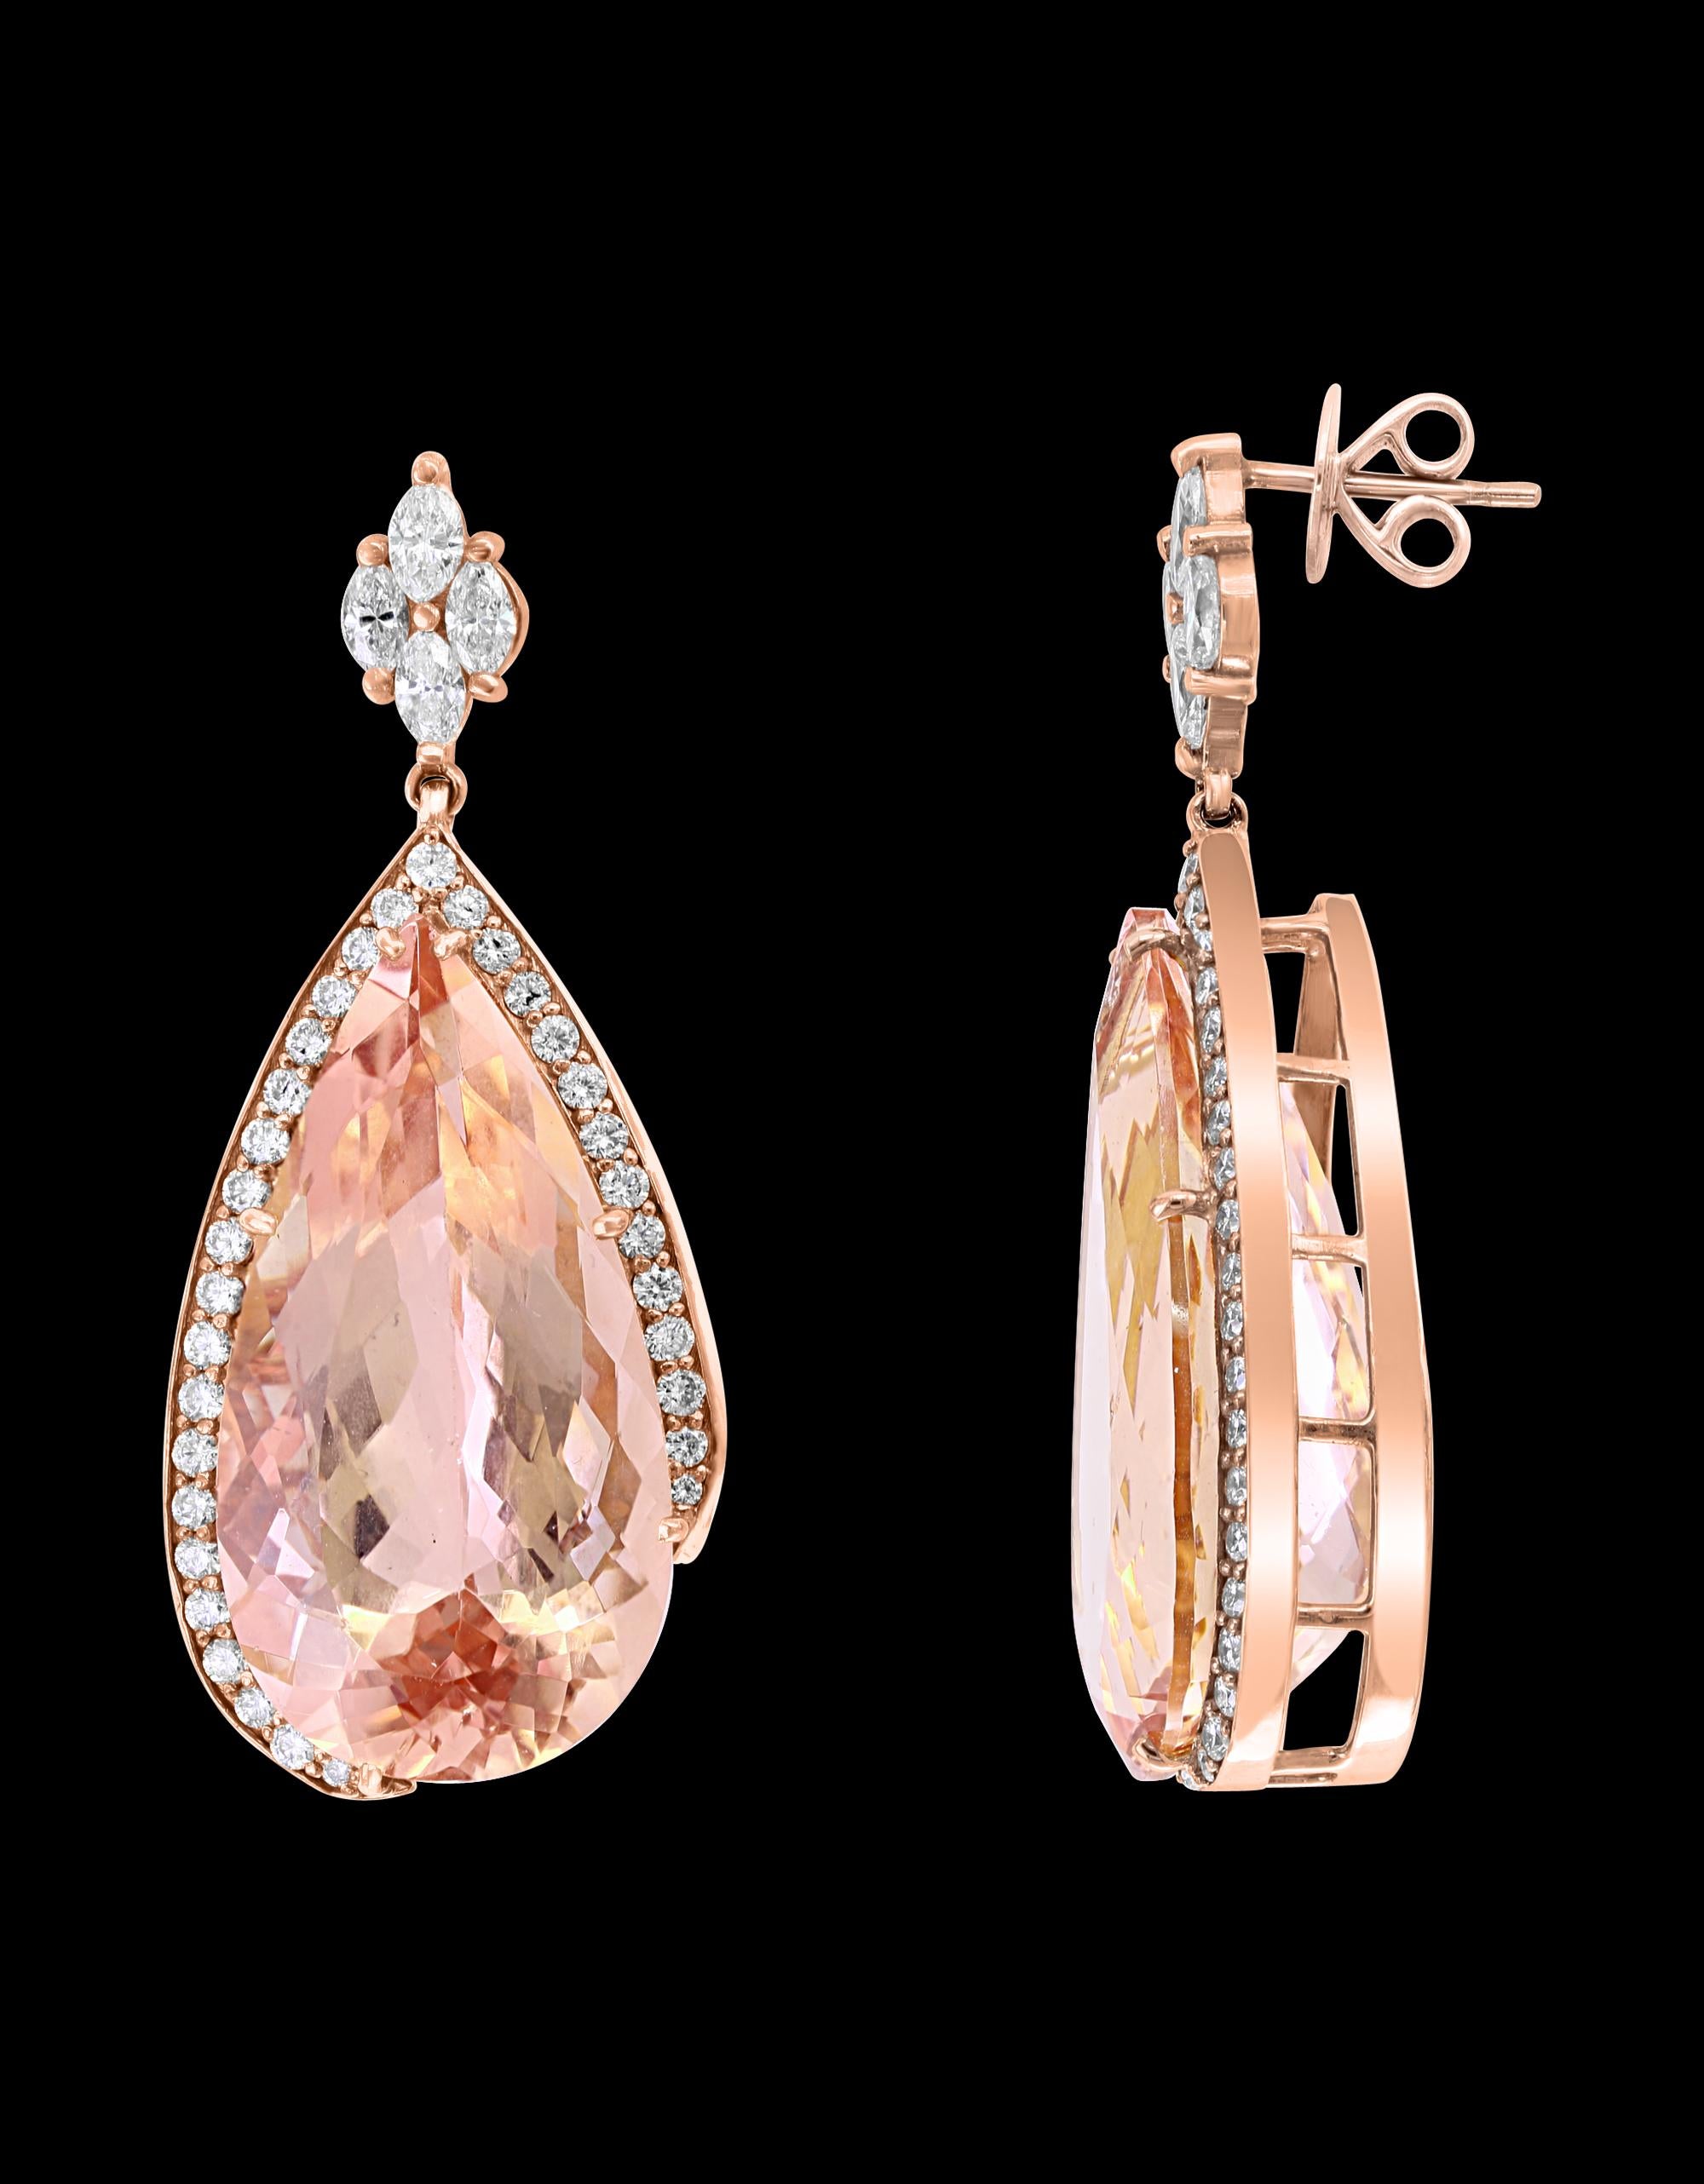 Pear Cut 200 Carat Natural Morganite and Diamond Cocktail Earring and Pendant Set 18K PG For Sale